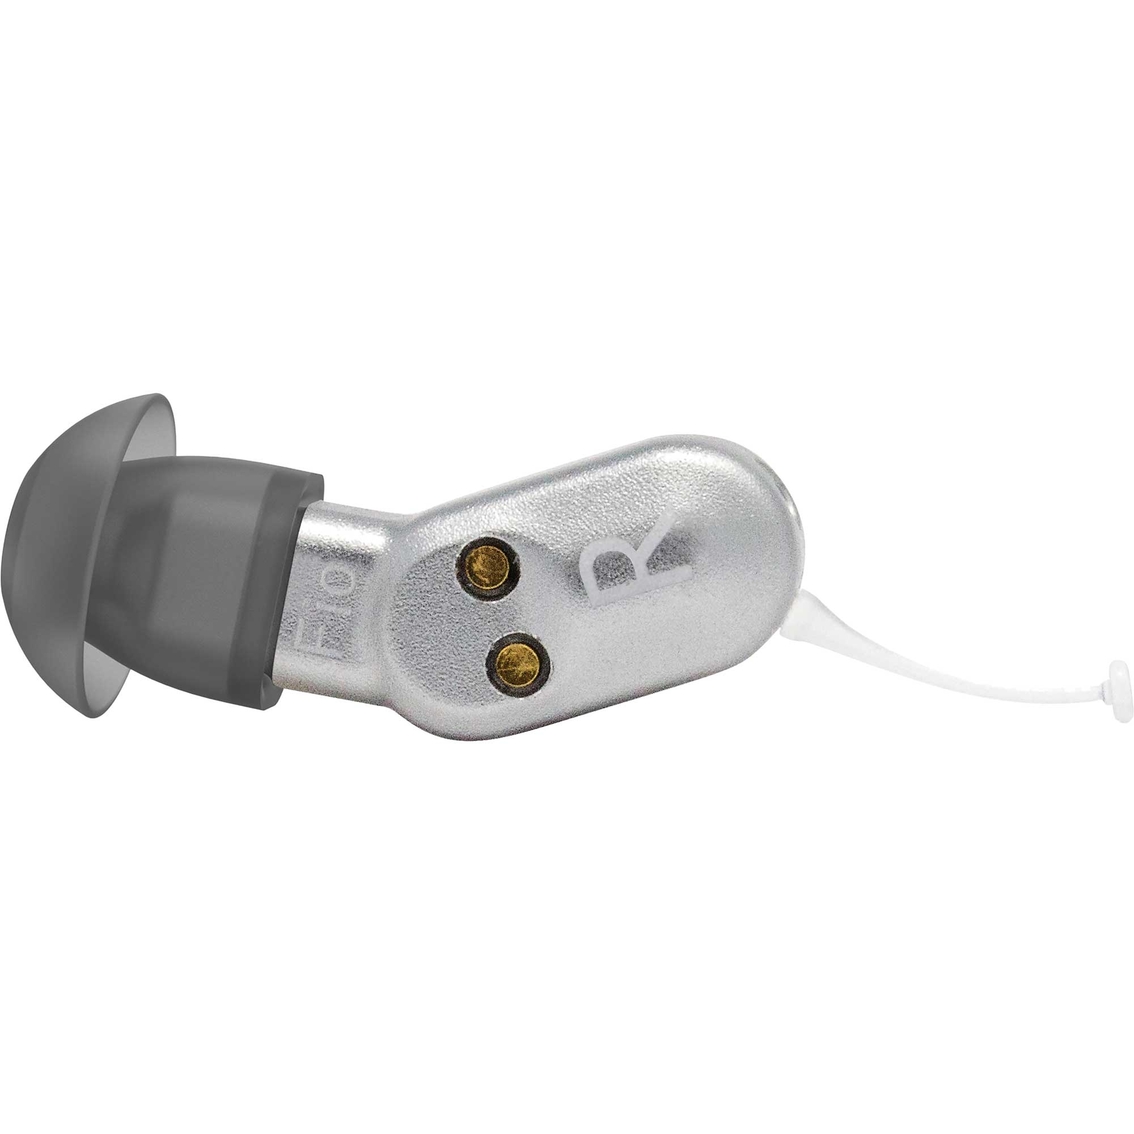 Lucid Hearing Fio In Canal Rechargeable Hearing Aids - Image 6 of 6